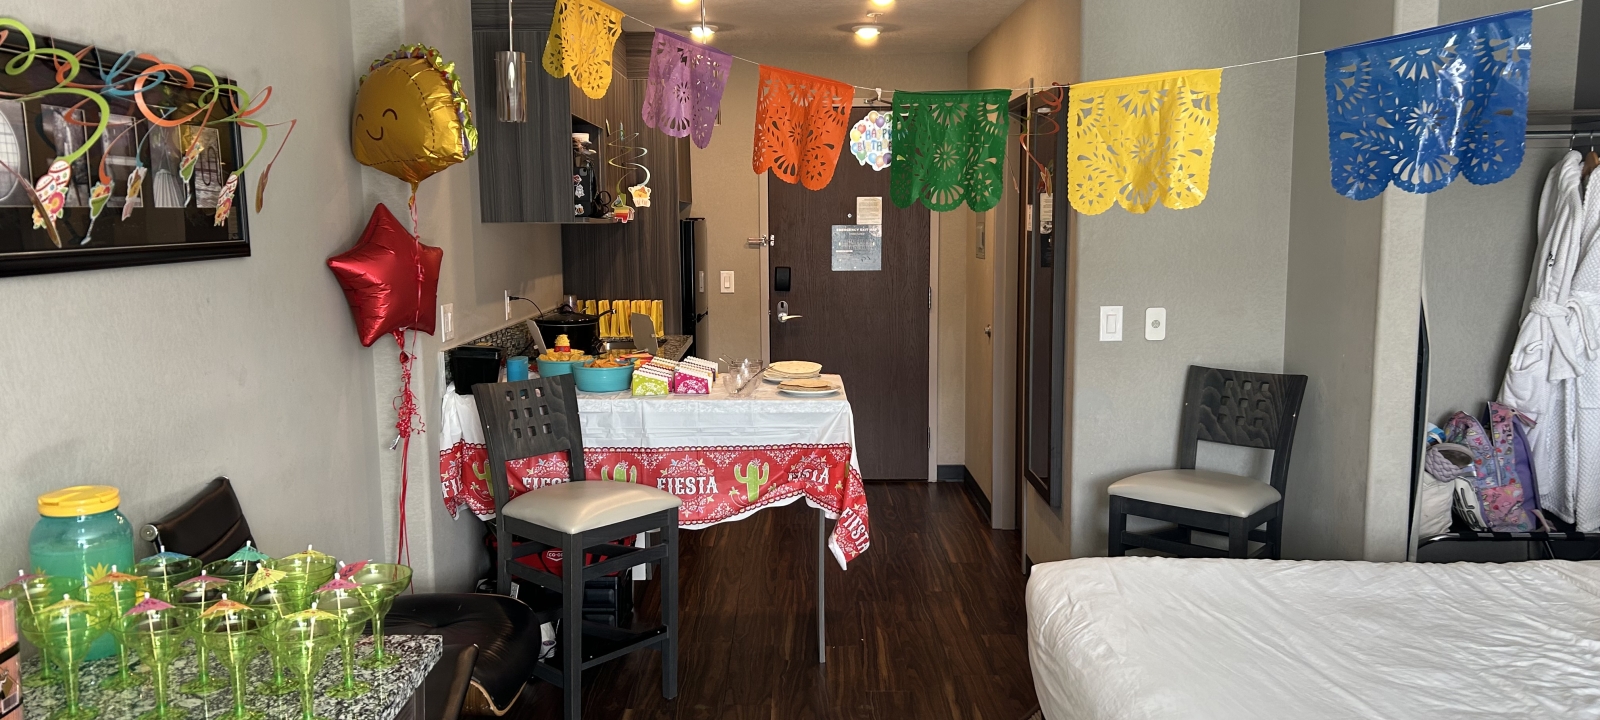 A Fiesta Pool Party at Home Inn and Suites